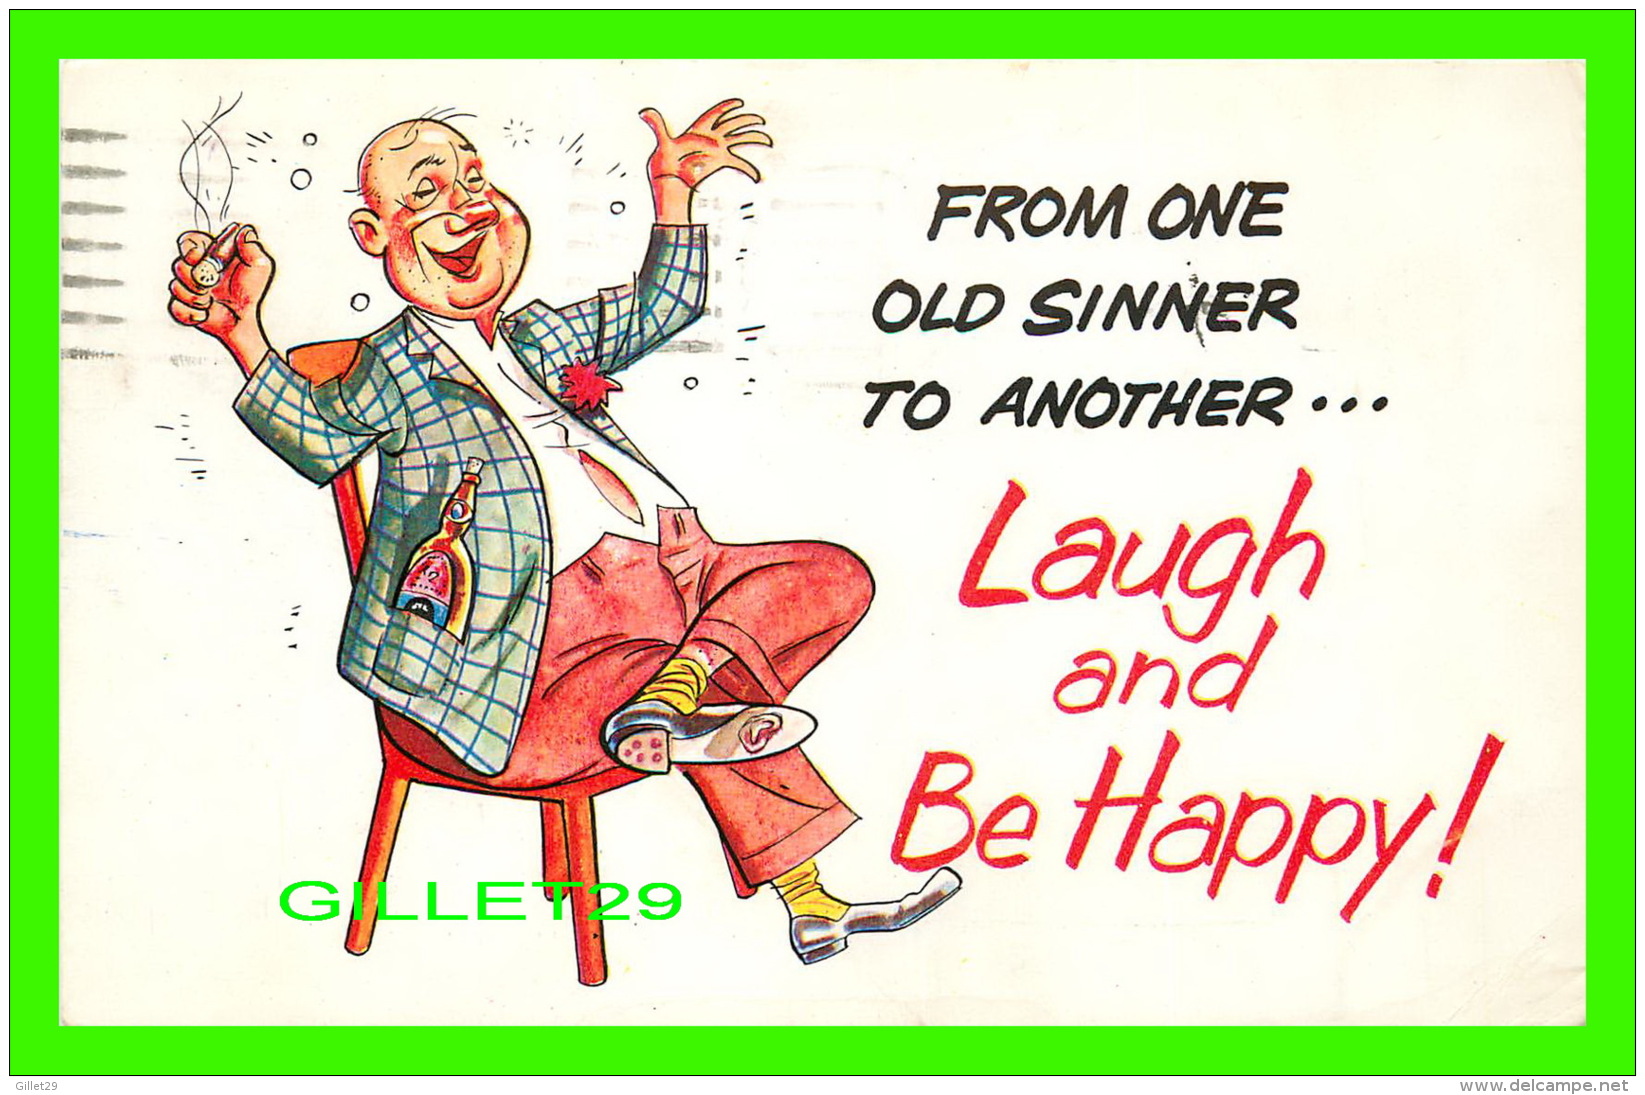 HUMOUR, COMICS - FROM ONE OLD SINNER TO ANOTHER LAUGH AND BE HAPPY ! - TRAVEL IN 1959 - PUB. BY COOPER POSTCARDS CO - - Humour